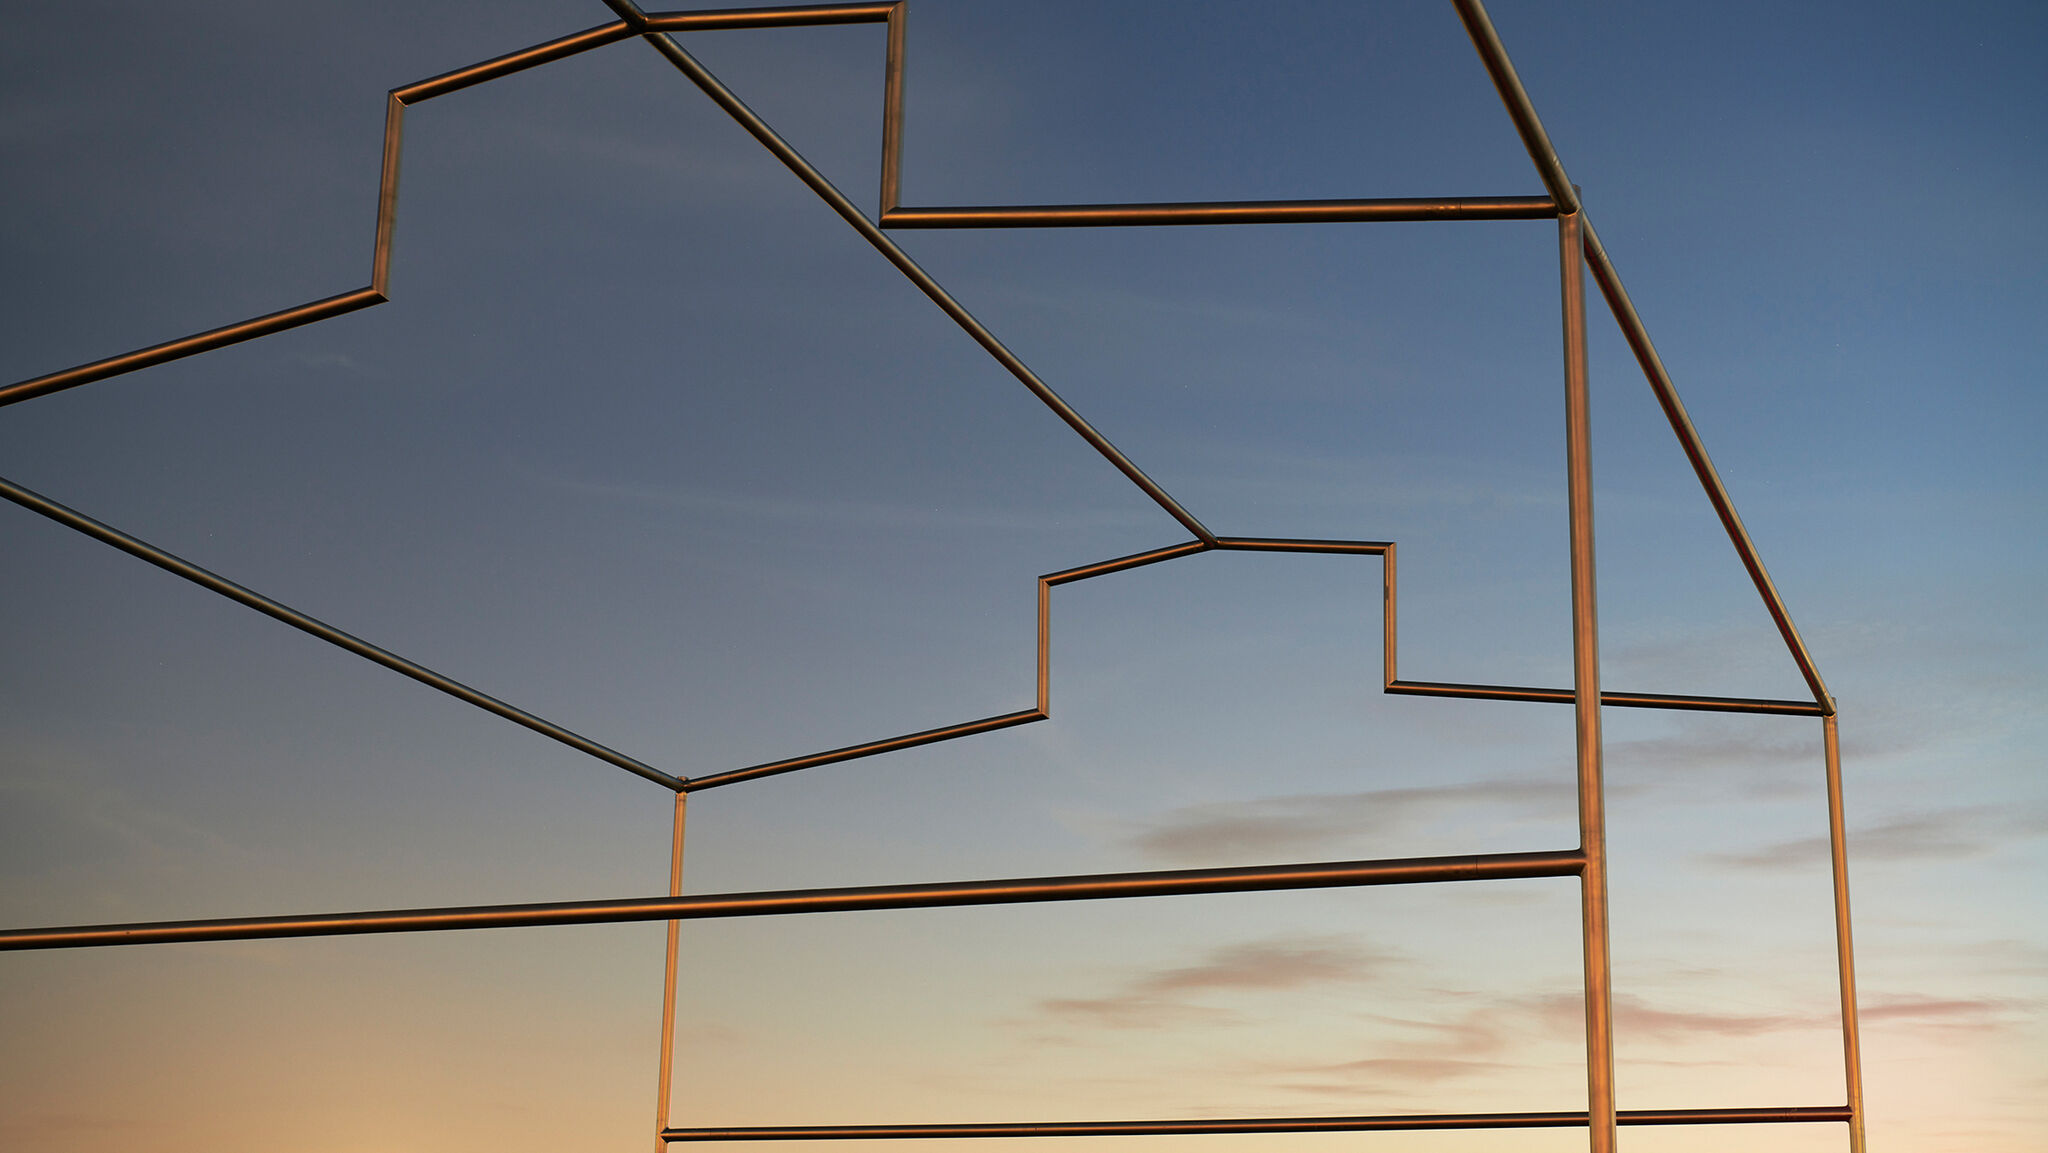 Outline of a building made from steel pipes, against a sunset sky.